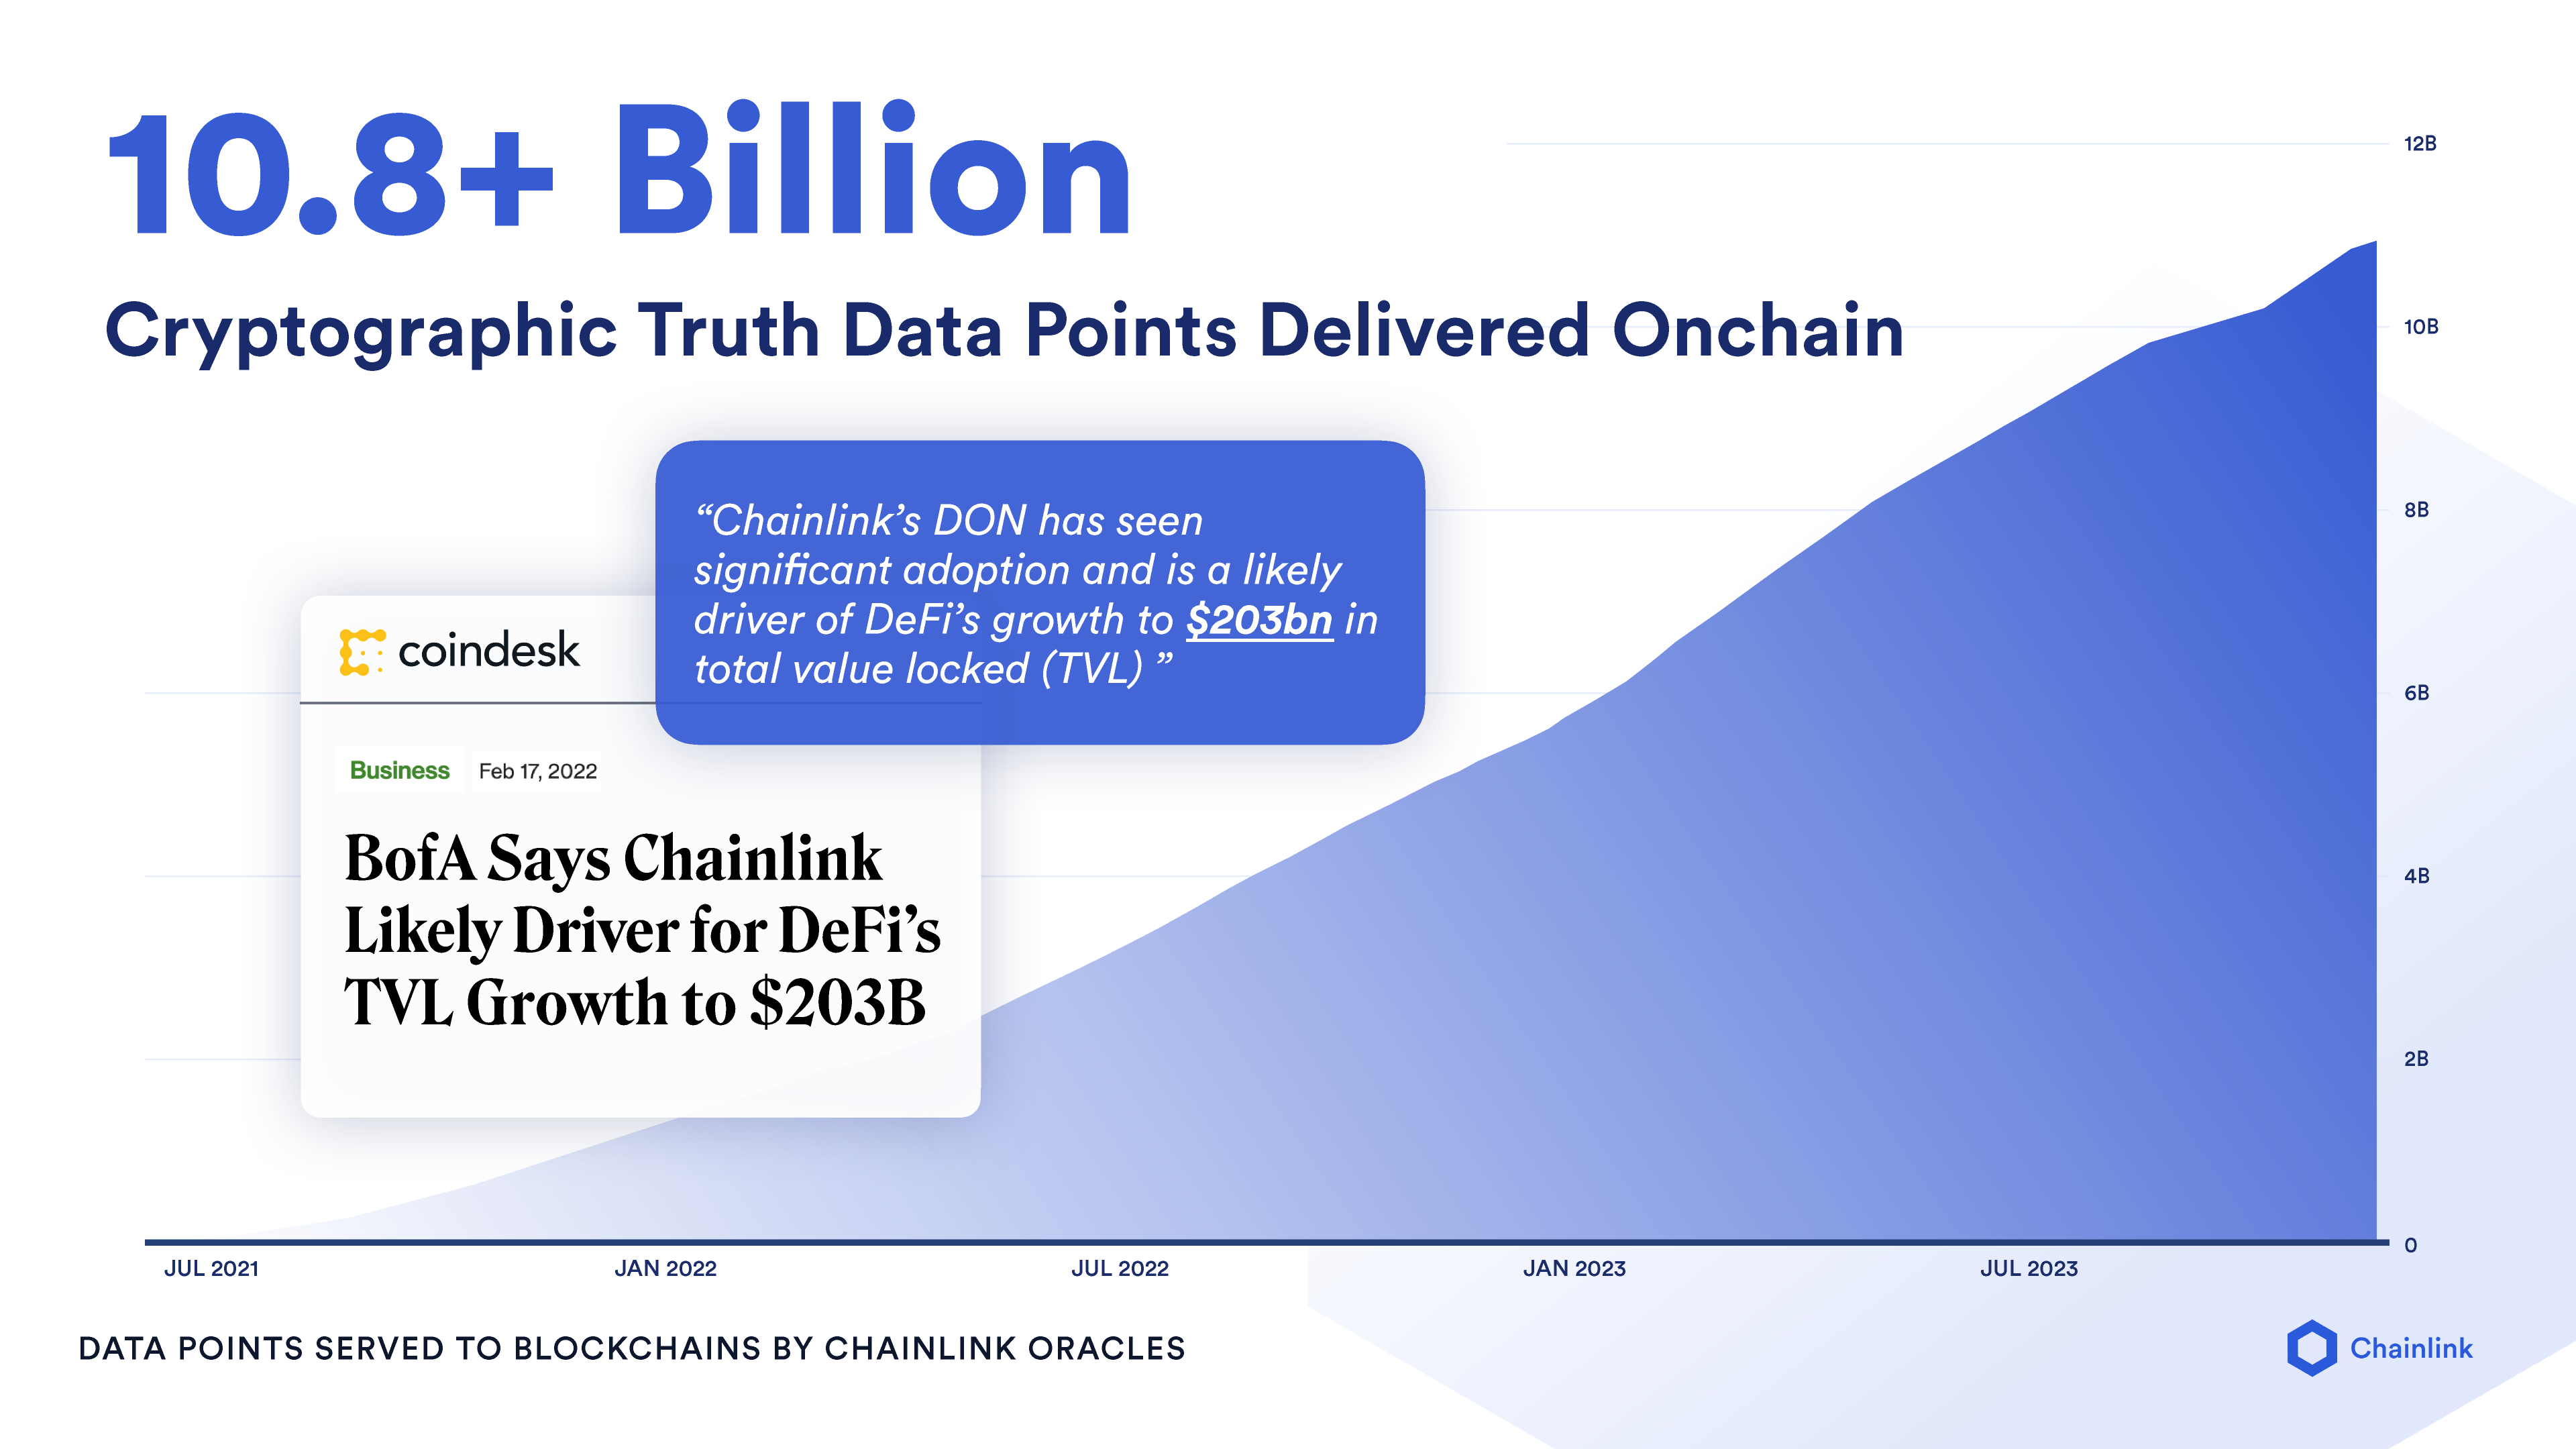 Diagram of cumulative data points delivered onchain by Chainlink. 